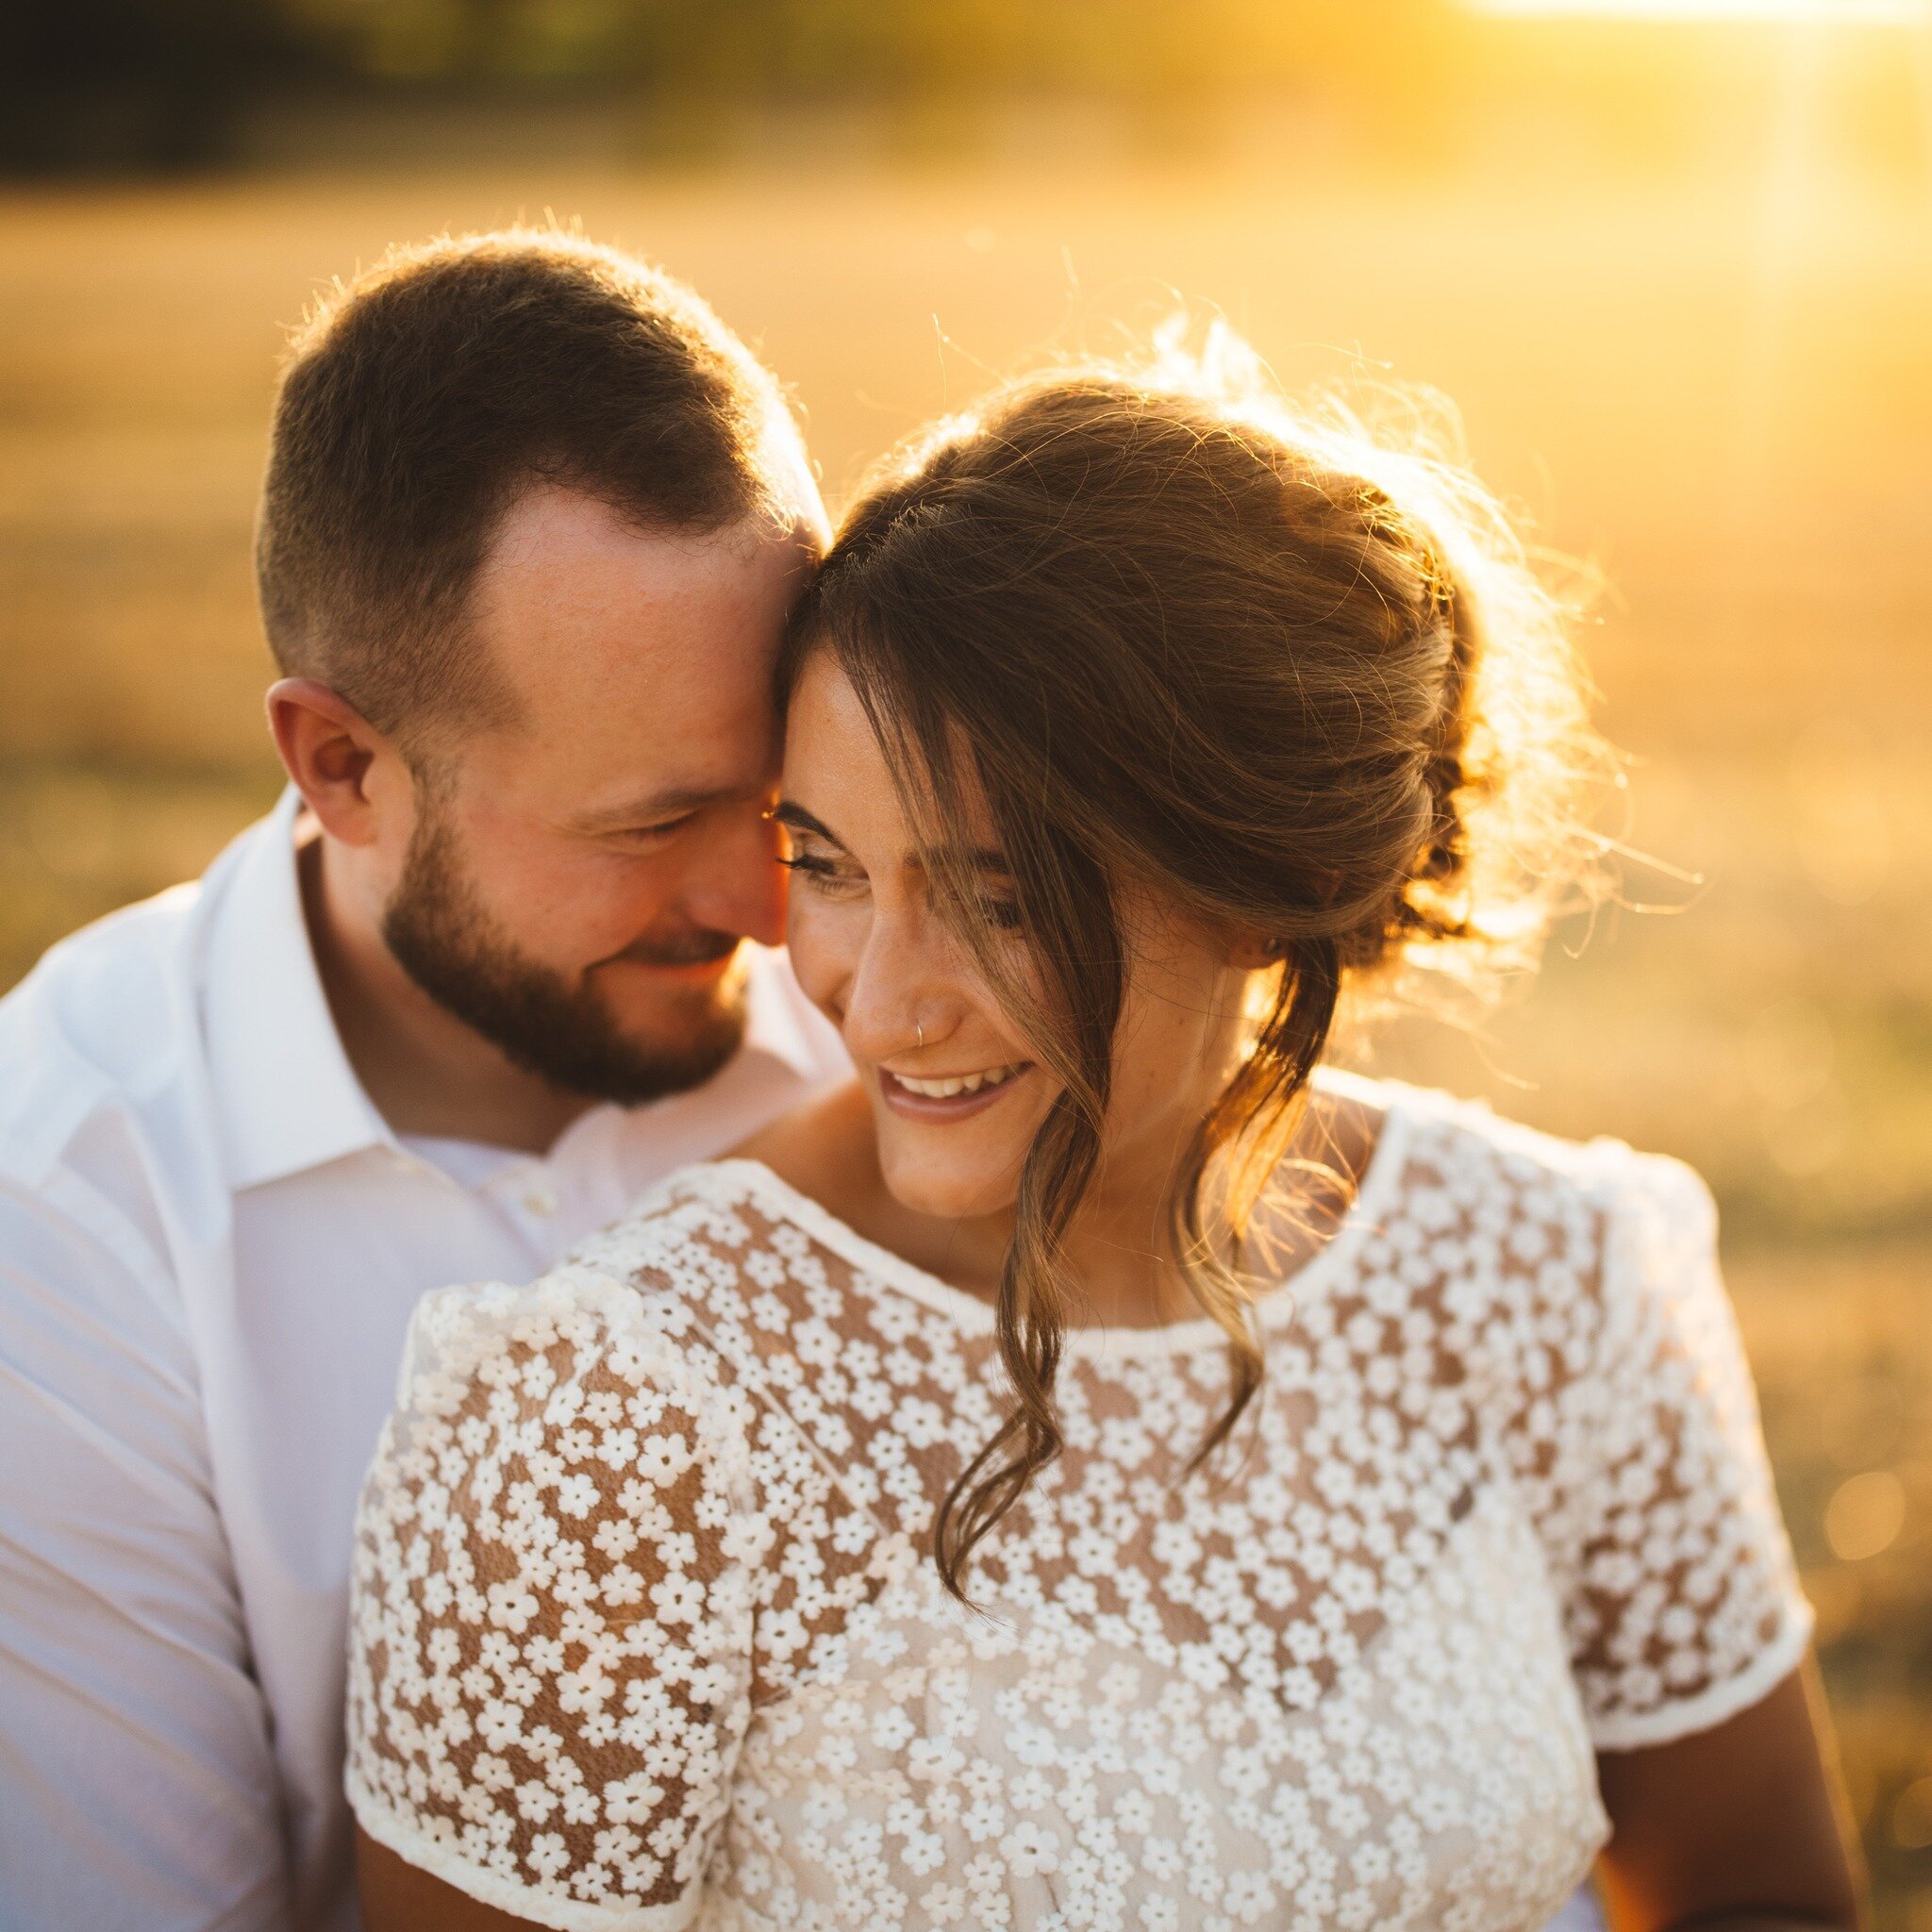 I'm always that photographer who'll come and grab you if the light is beautiful, and there was no way we were missing this gorgeous Huntsmill golden hour! Thank you Steph &amp; Matty for running out with us to catch the light ☀️

Venue: @huntsmillfar